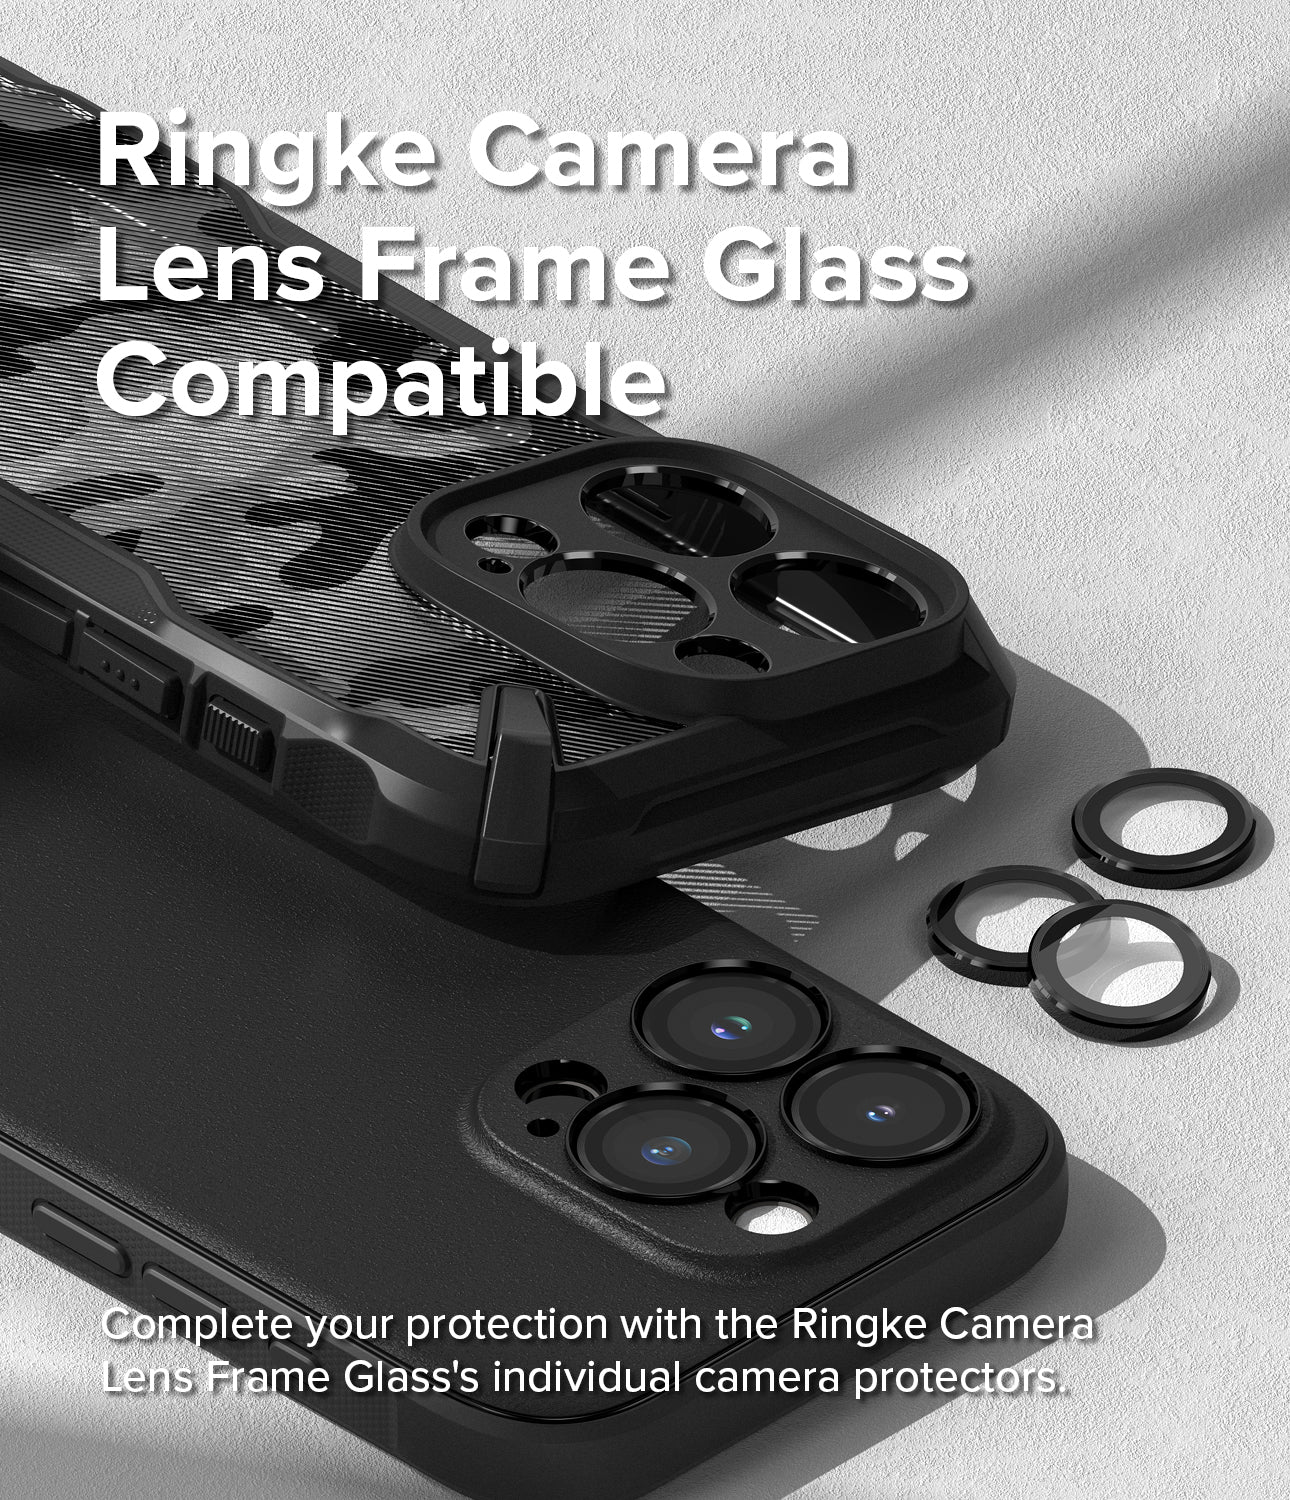 iPhone 15 Pro Max Case | Onyx - Navy - Ringke Camera Lens Frame Glass Compatible. Complete your protection with the Ringke Camera Lens Frame Glass' individual camera protectors.